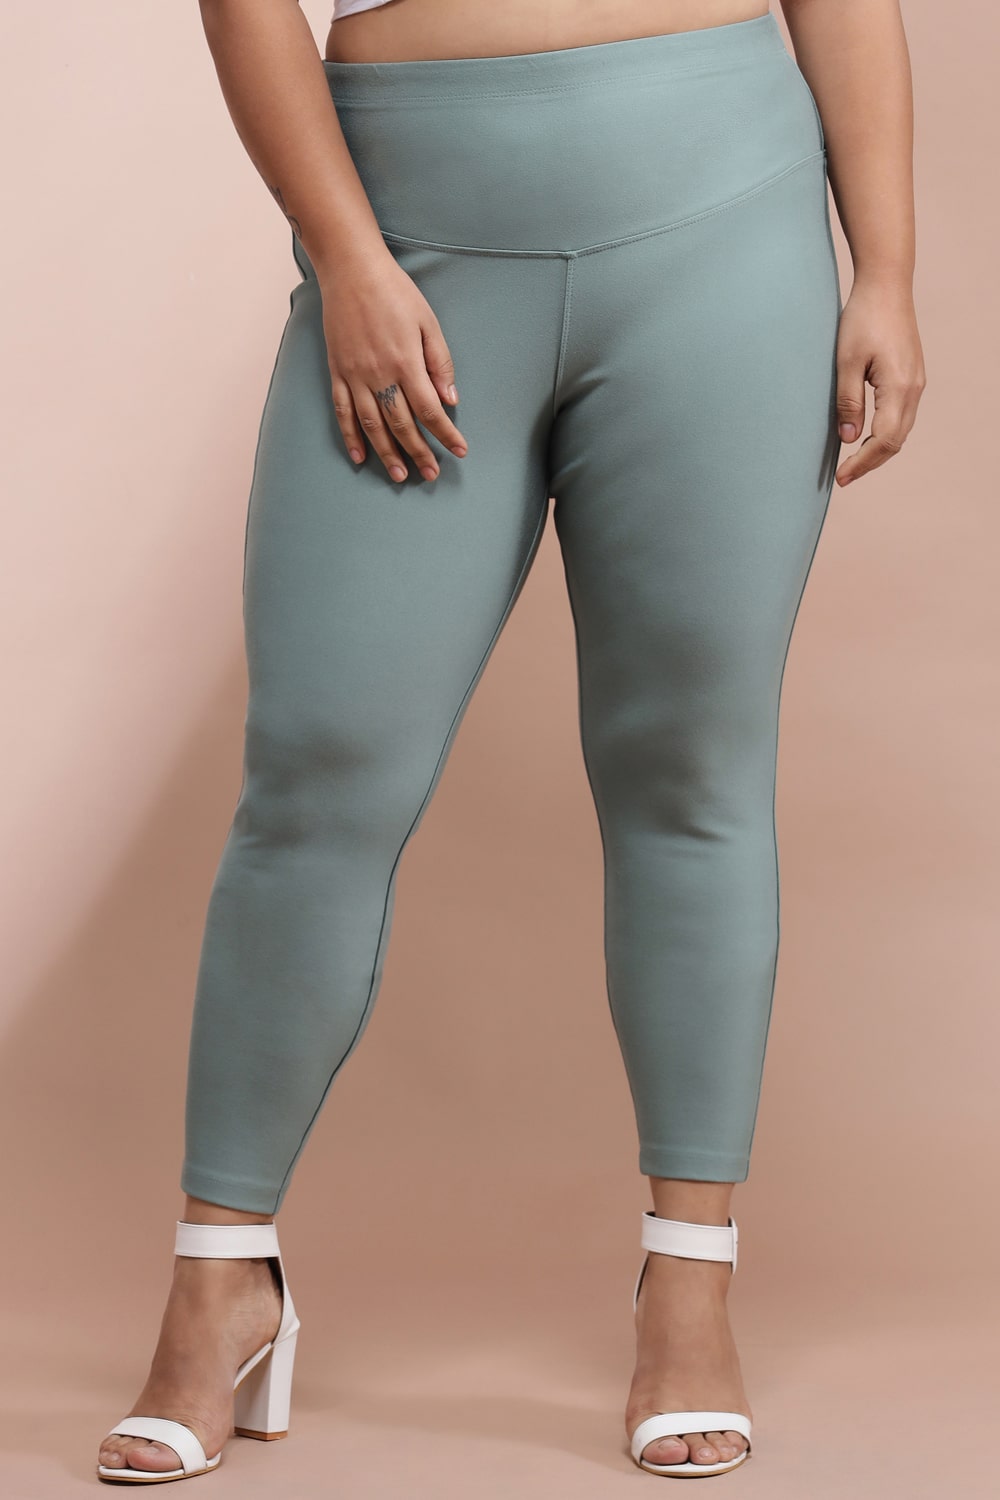 Upgrade Workout Gear With Size Gym Pants Women